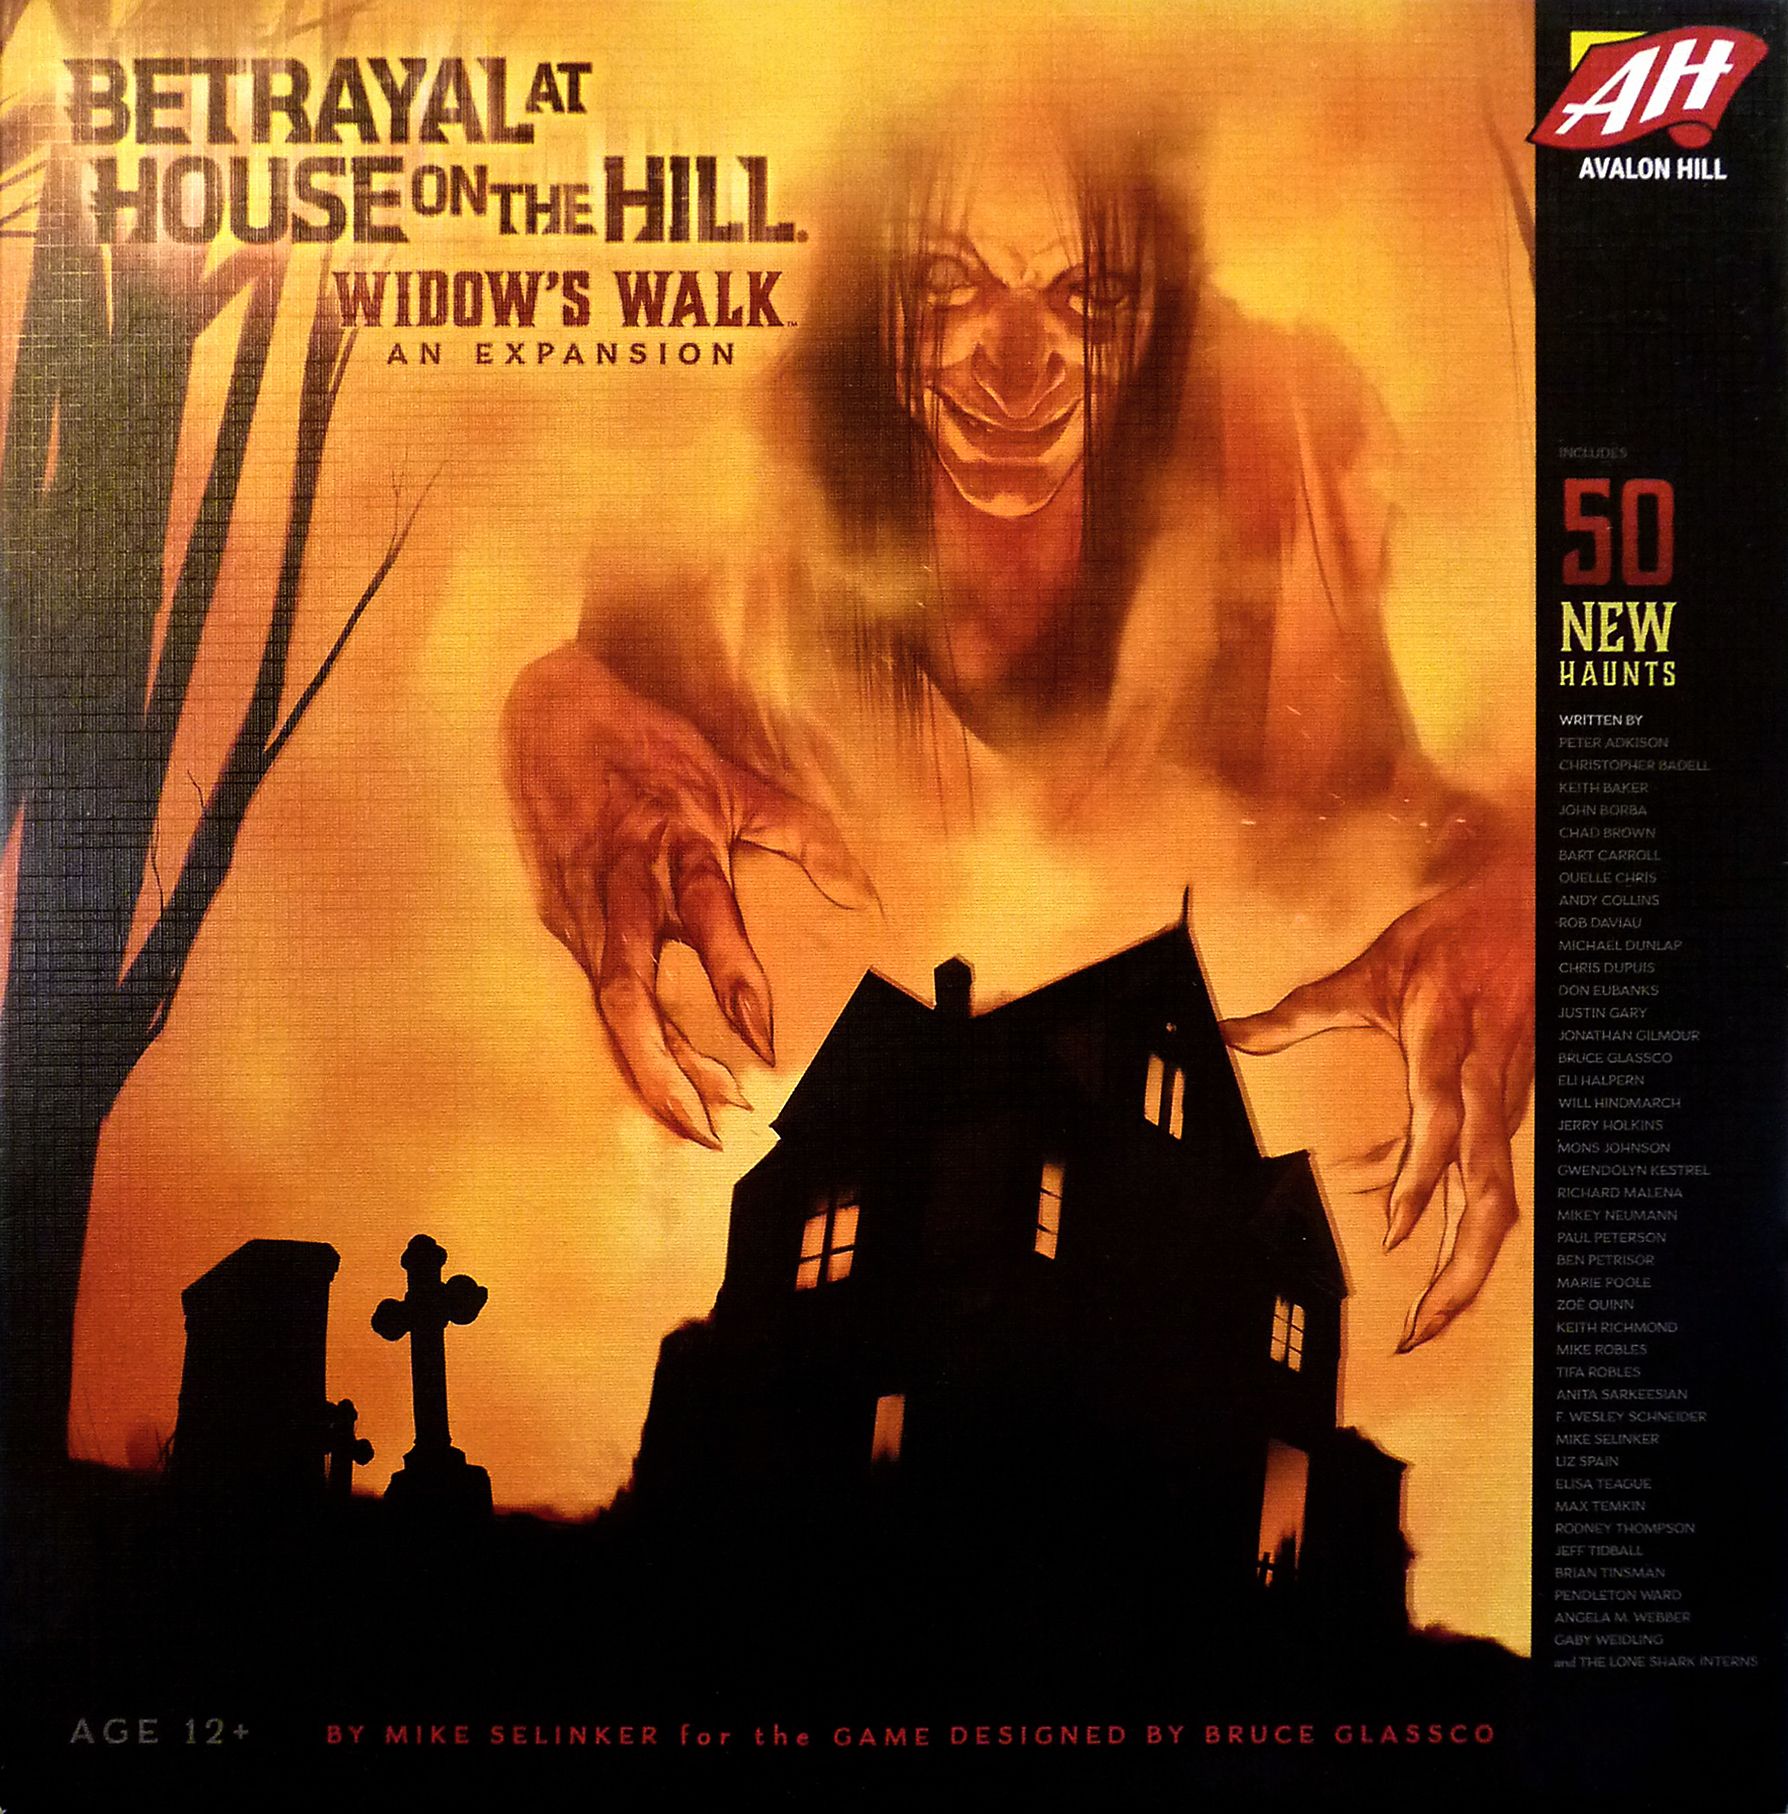 Betrayal at House on the Hill: Widow's Walk / 山中小屋: 望夫台擴充